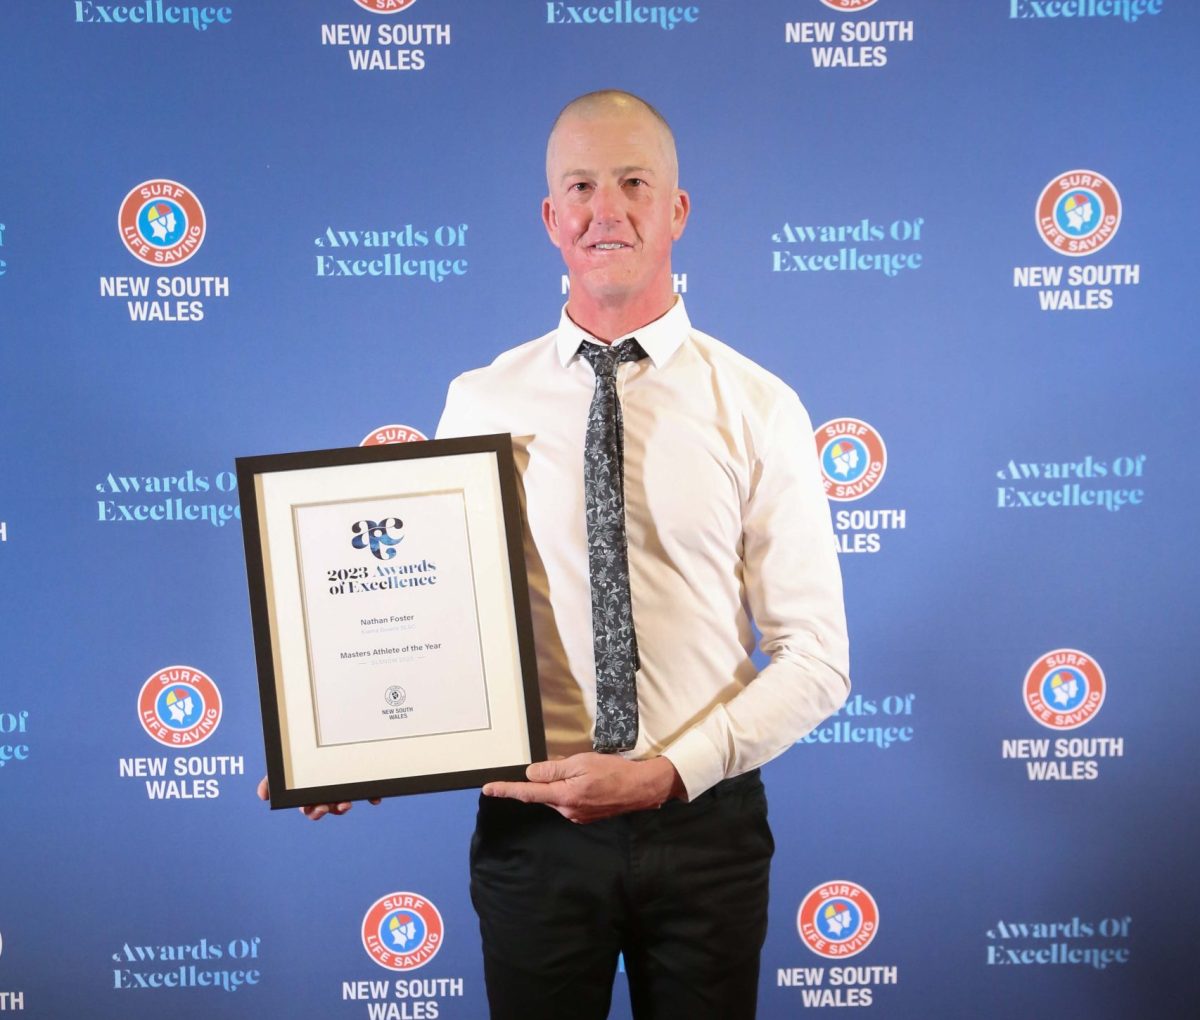 Nathan Foster of Surf Life Saving Kiama Downs holding an award at the Surf Life Saving NSW Awards of Excellence